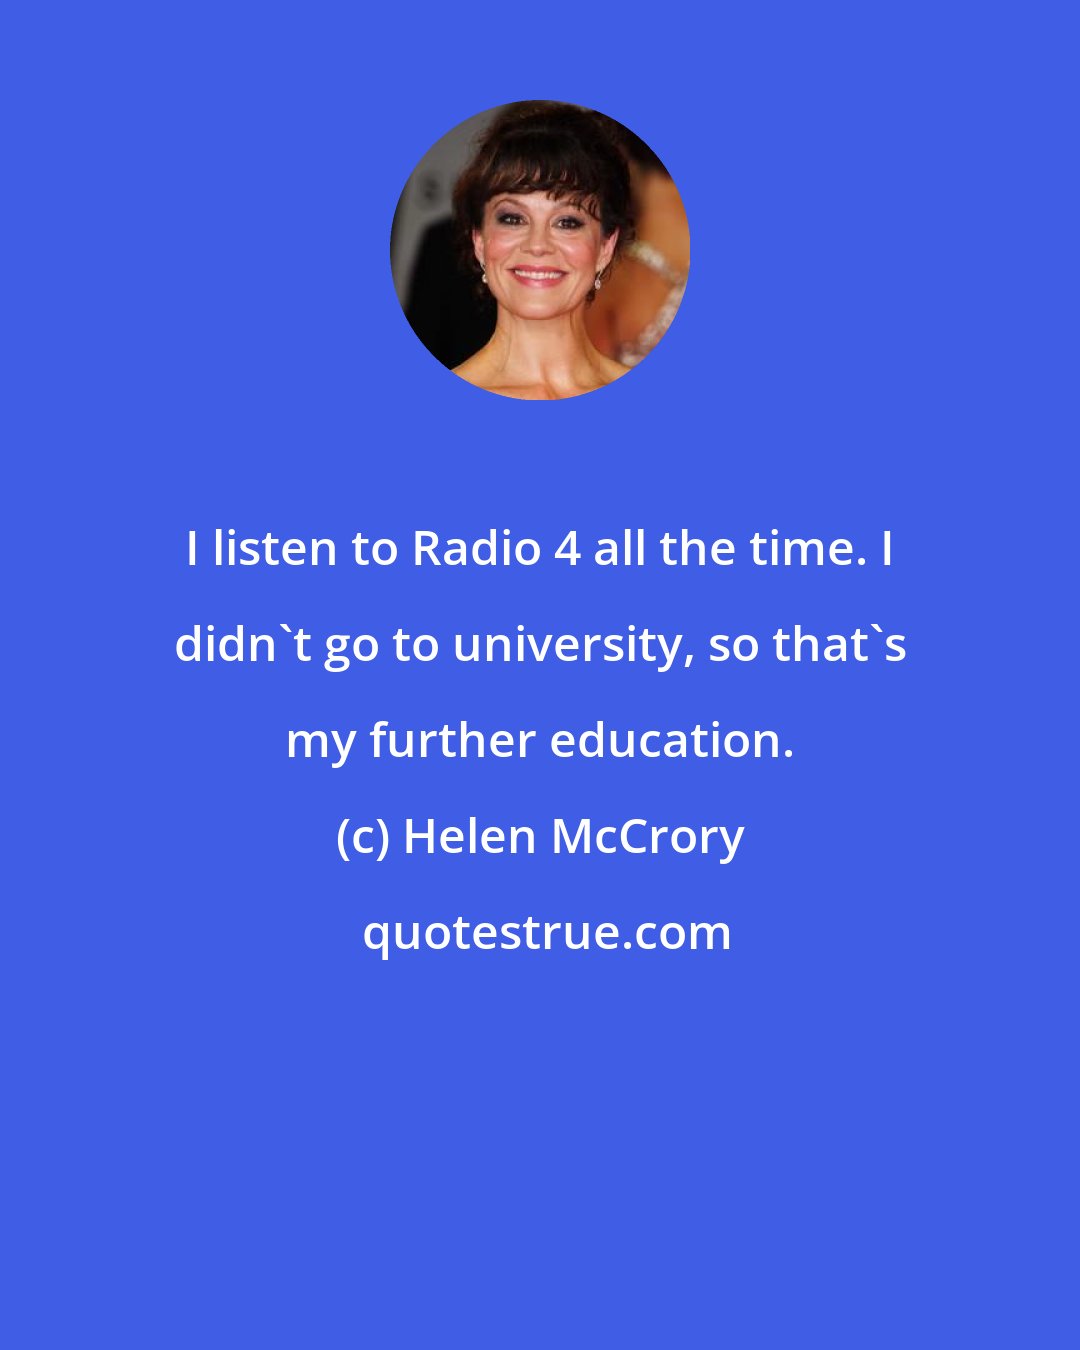 Helen McCrory: I listen to Radio 4 all the time. I didn't go to university, so that's my further education.